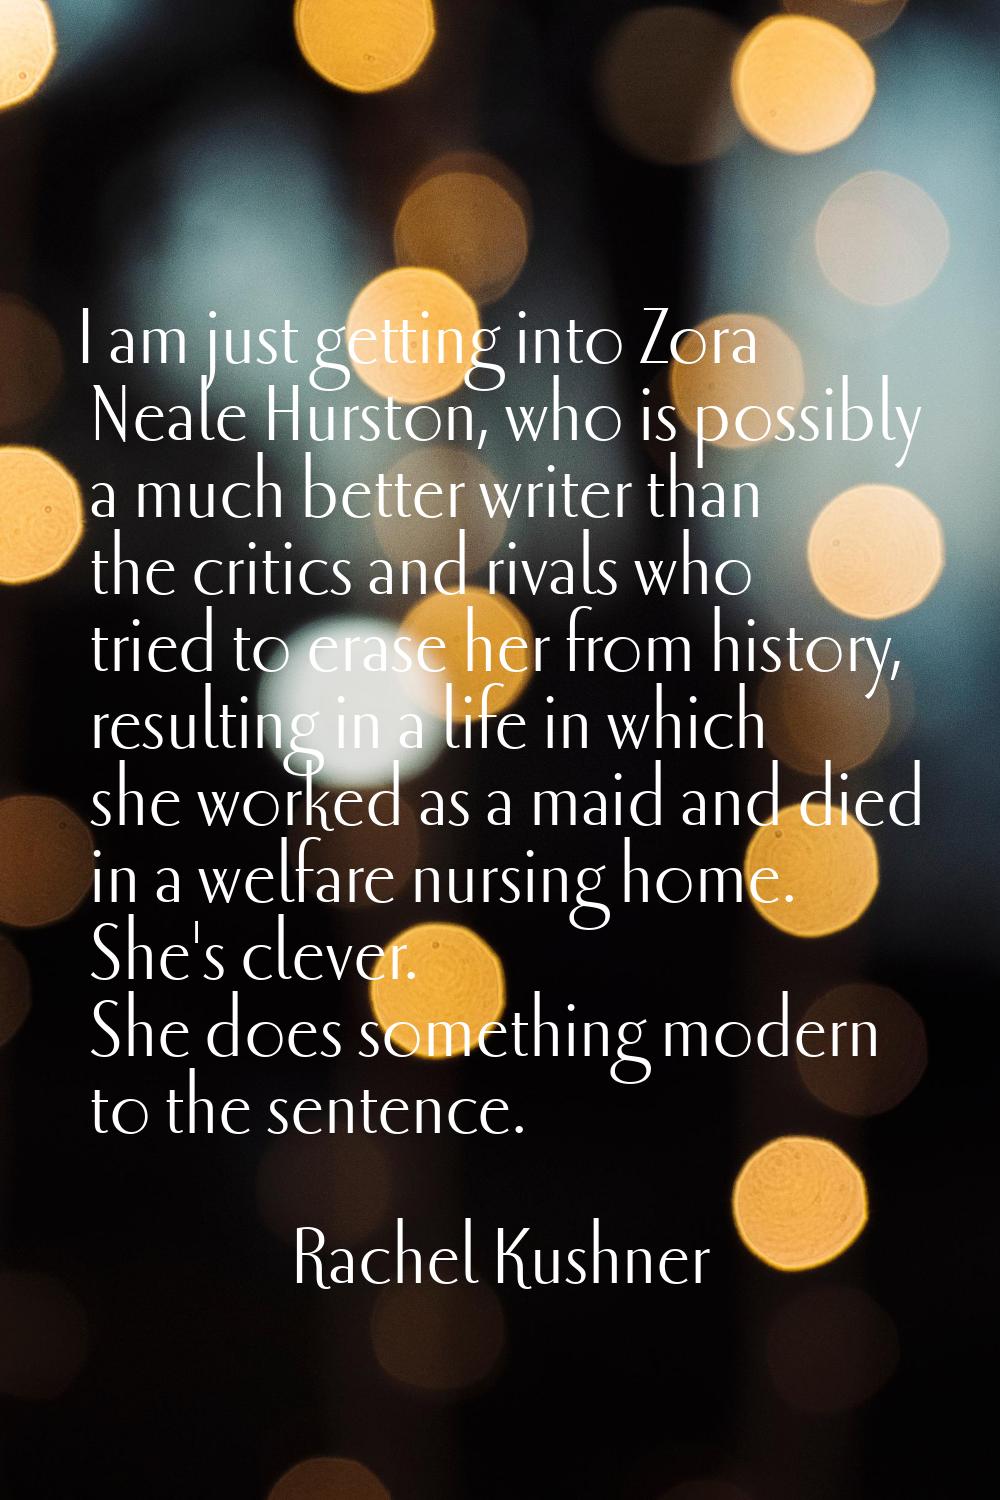 I am just getting into Zora Neale Hurston, who is possibly a much better writer than the critics an